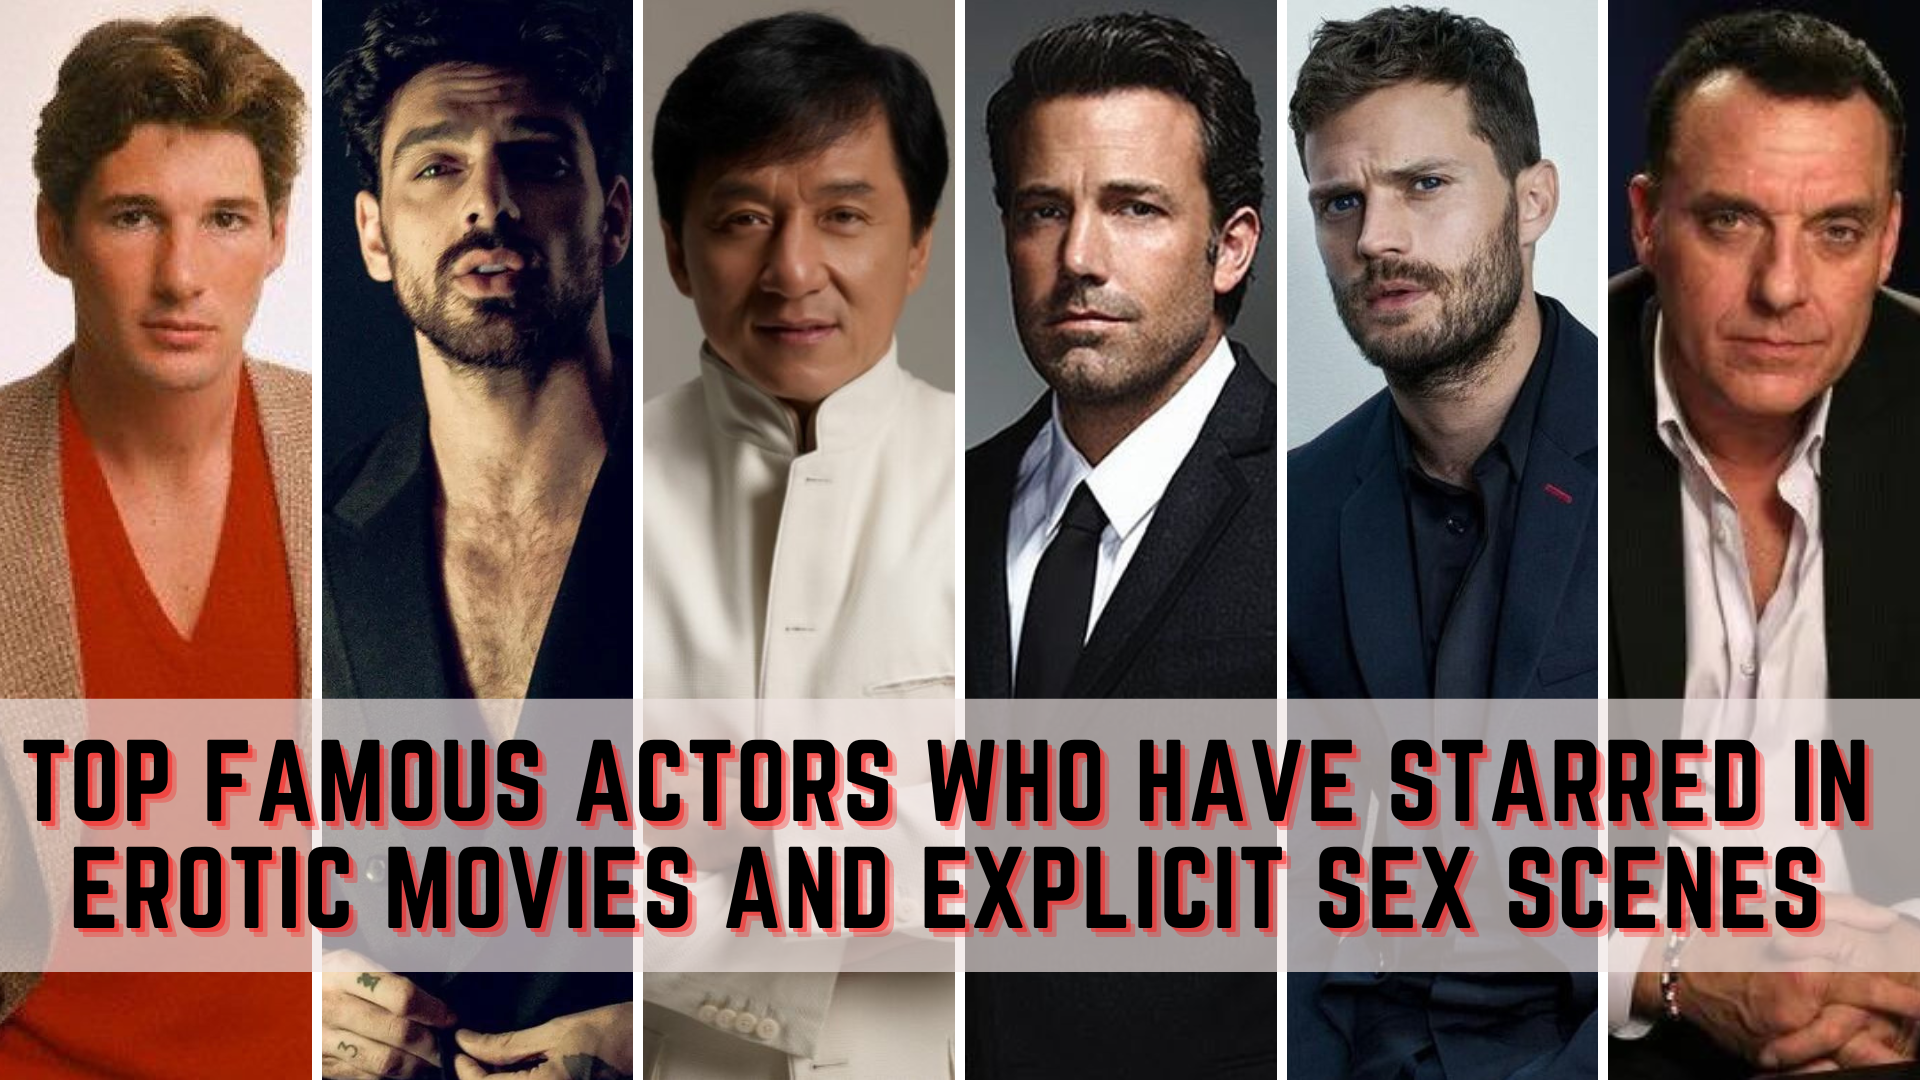 Top Famous Actors Who Have Starred In Erotic Movies And Explicit Sex Scenes